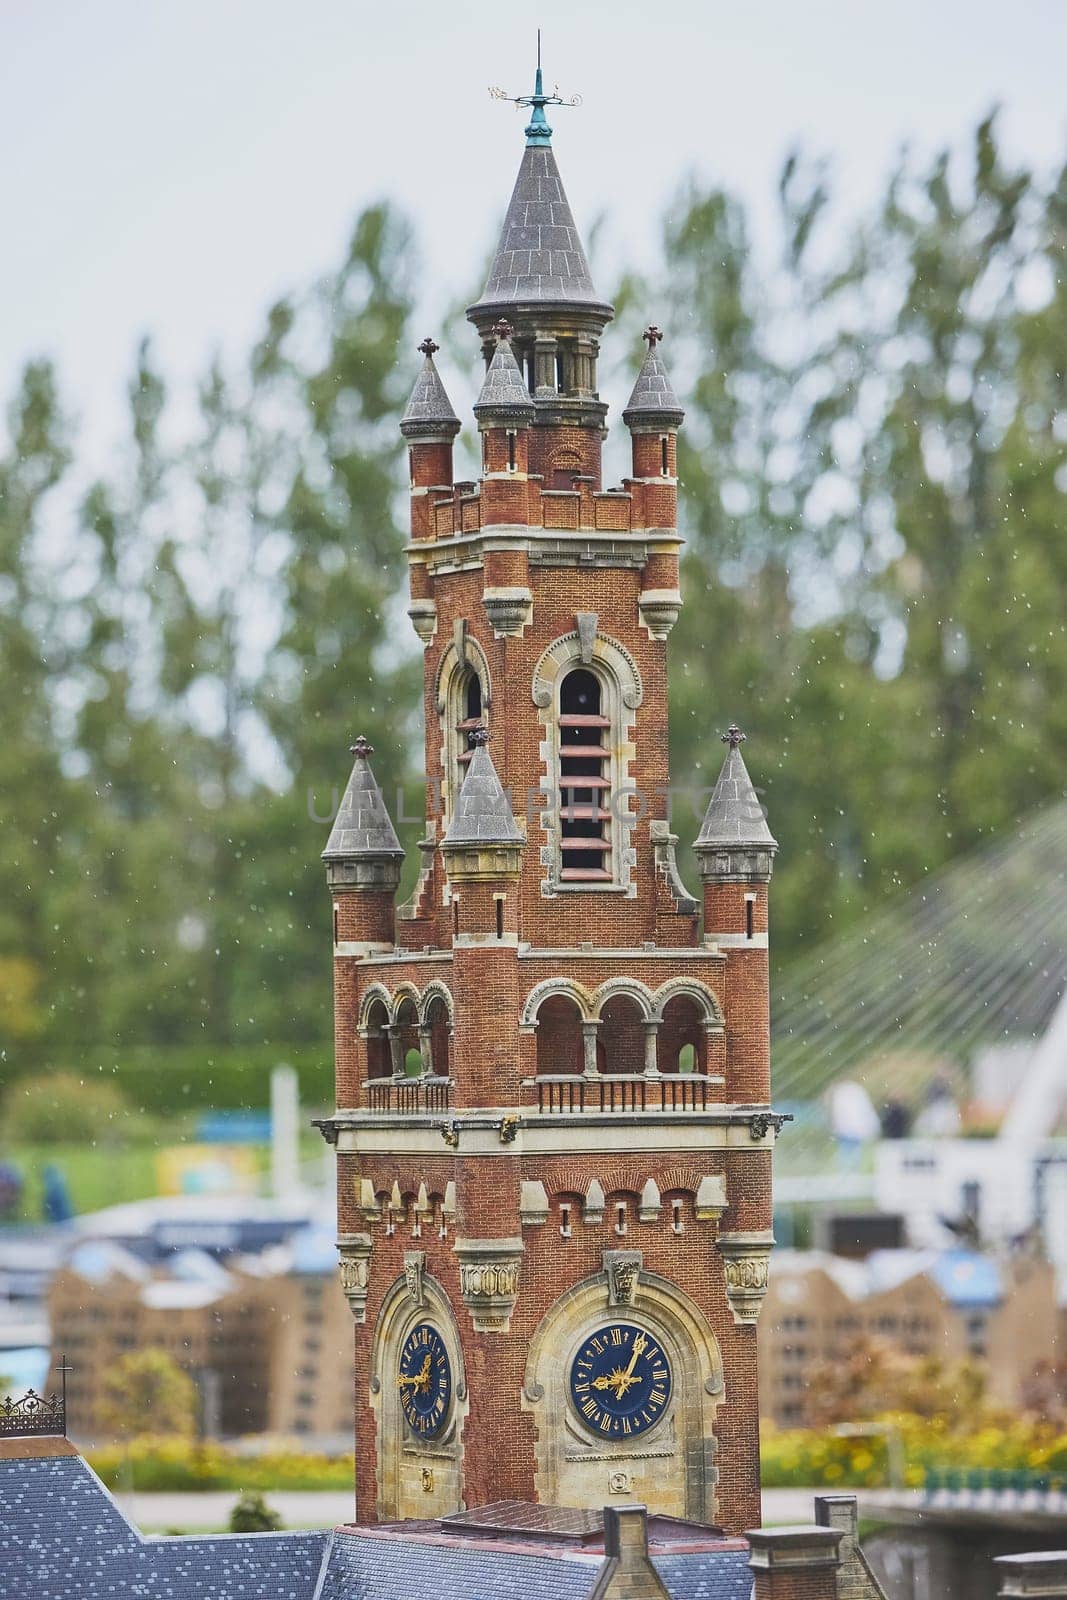 Small clock tower in a miniature city in the Netherlands by Viktor_Osypenko